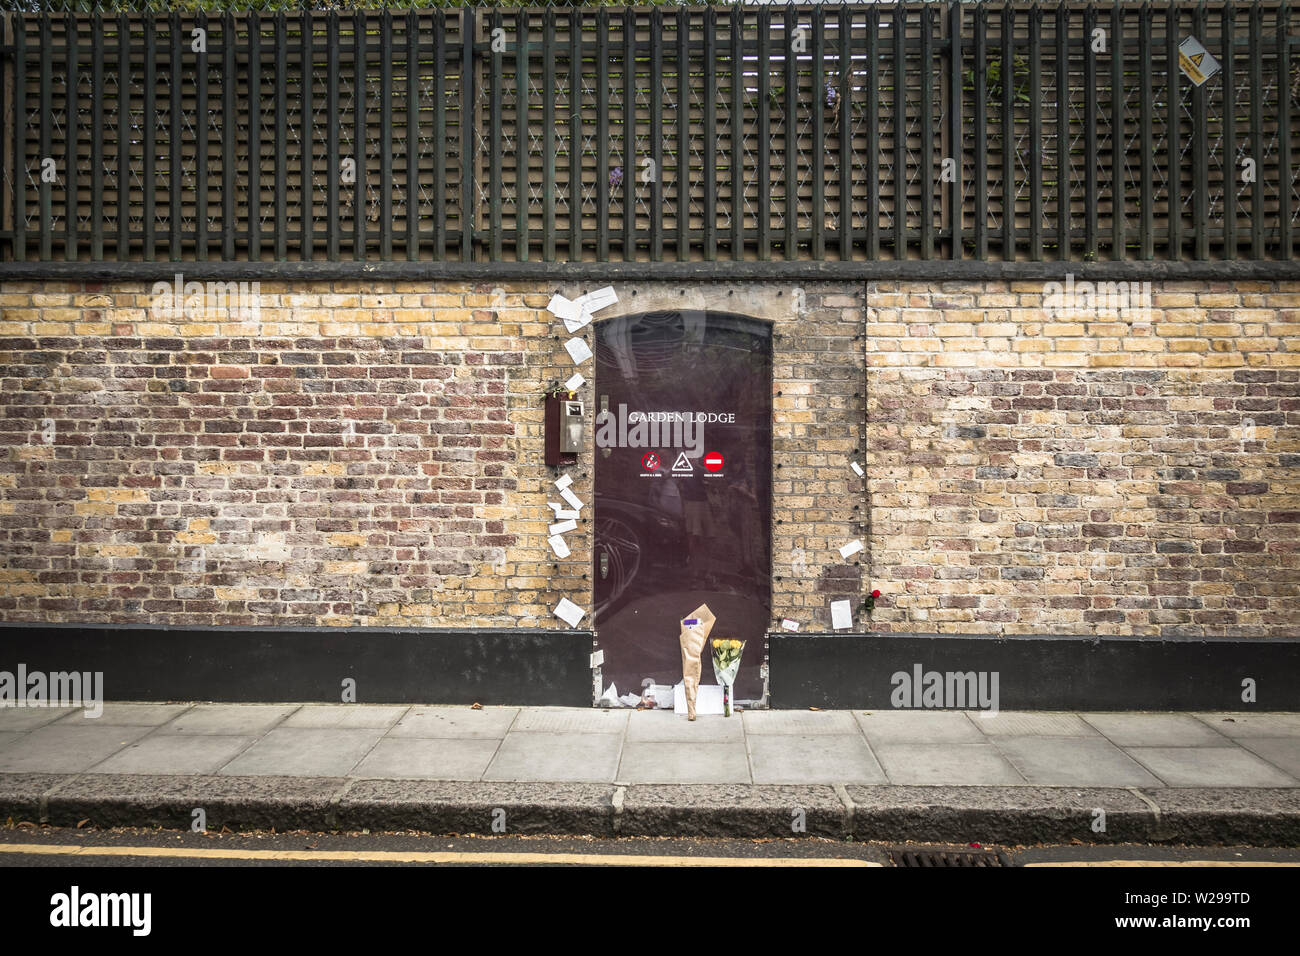 Handwritten tributes and bouquets of flowers placed outside a now sanitized Garden Lodge, Freddie Mercury's former home, on Gay Pride Day 2019. Stock Photo